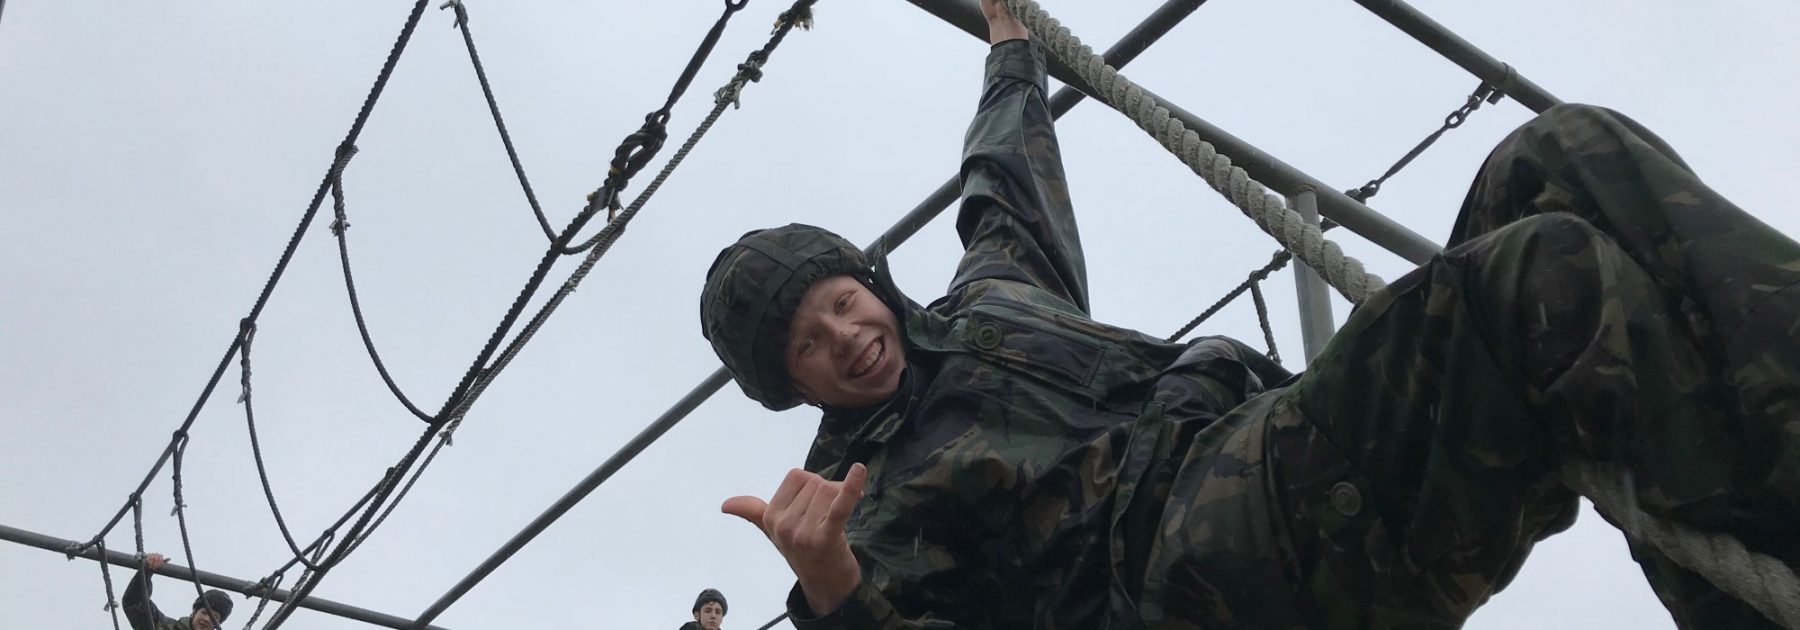 Cadets Range & Obstacle Course Day